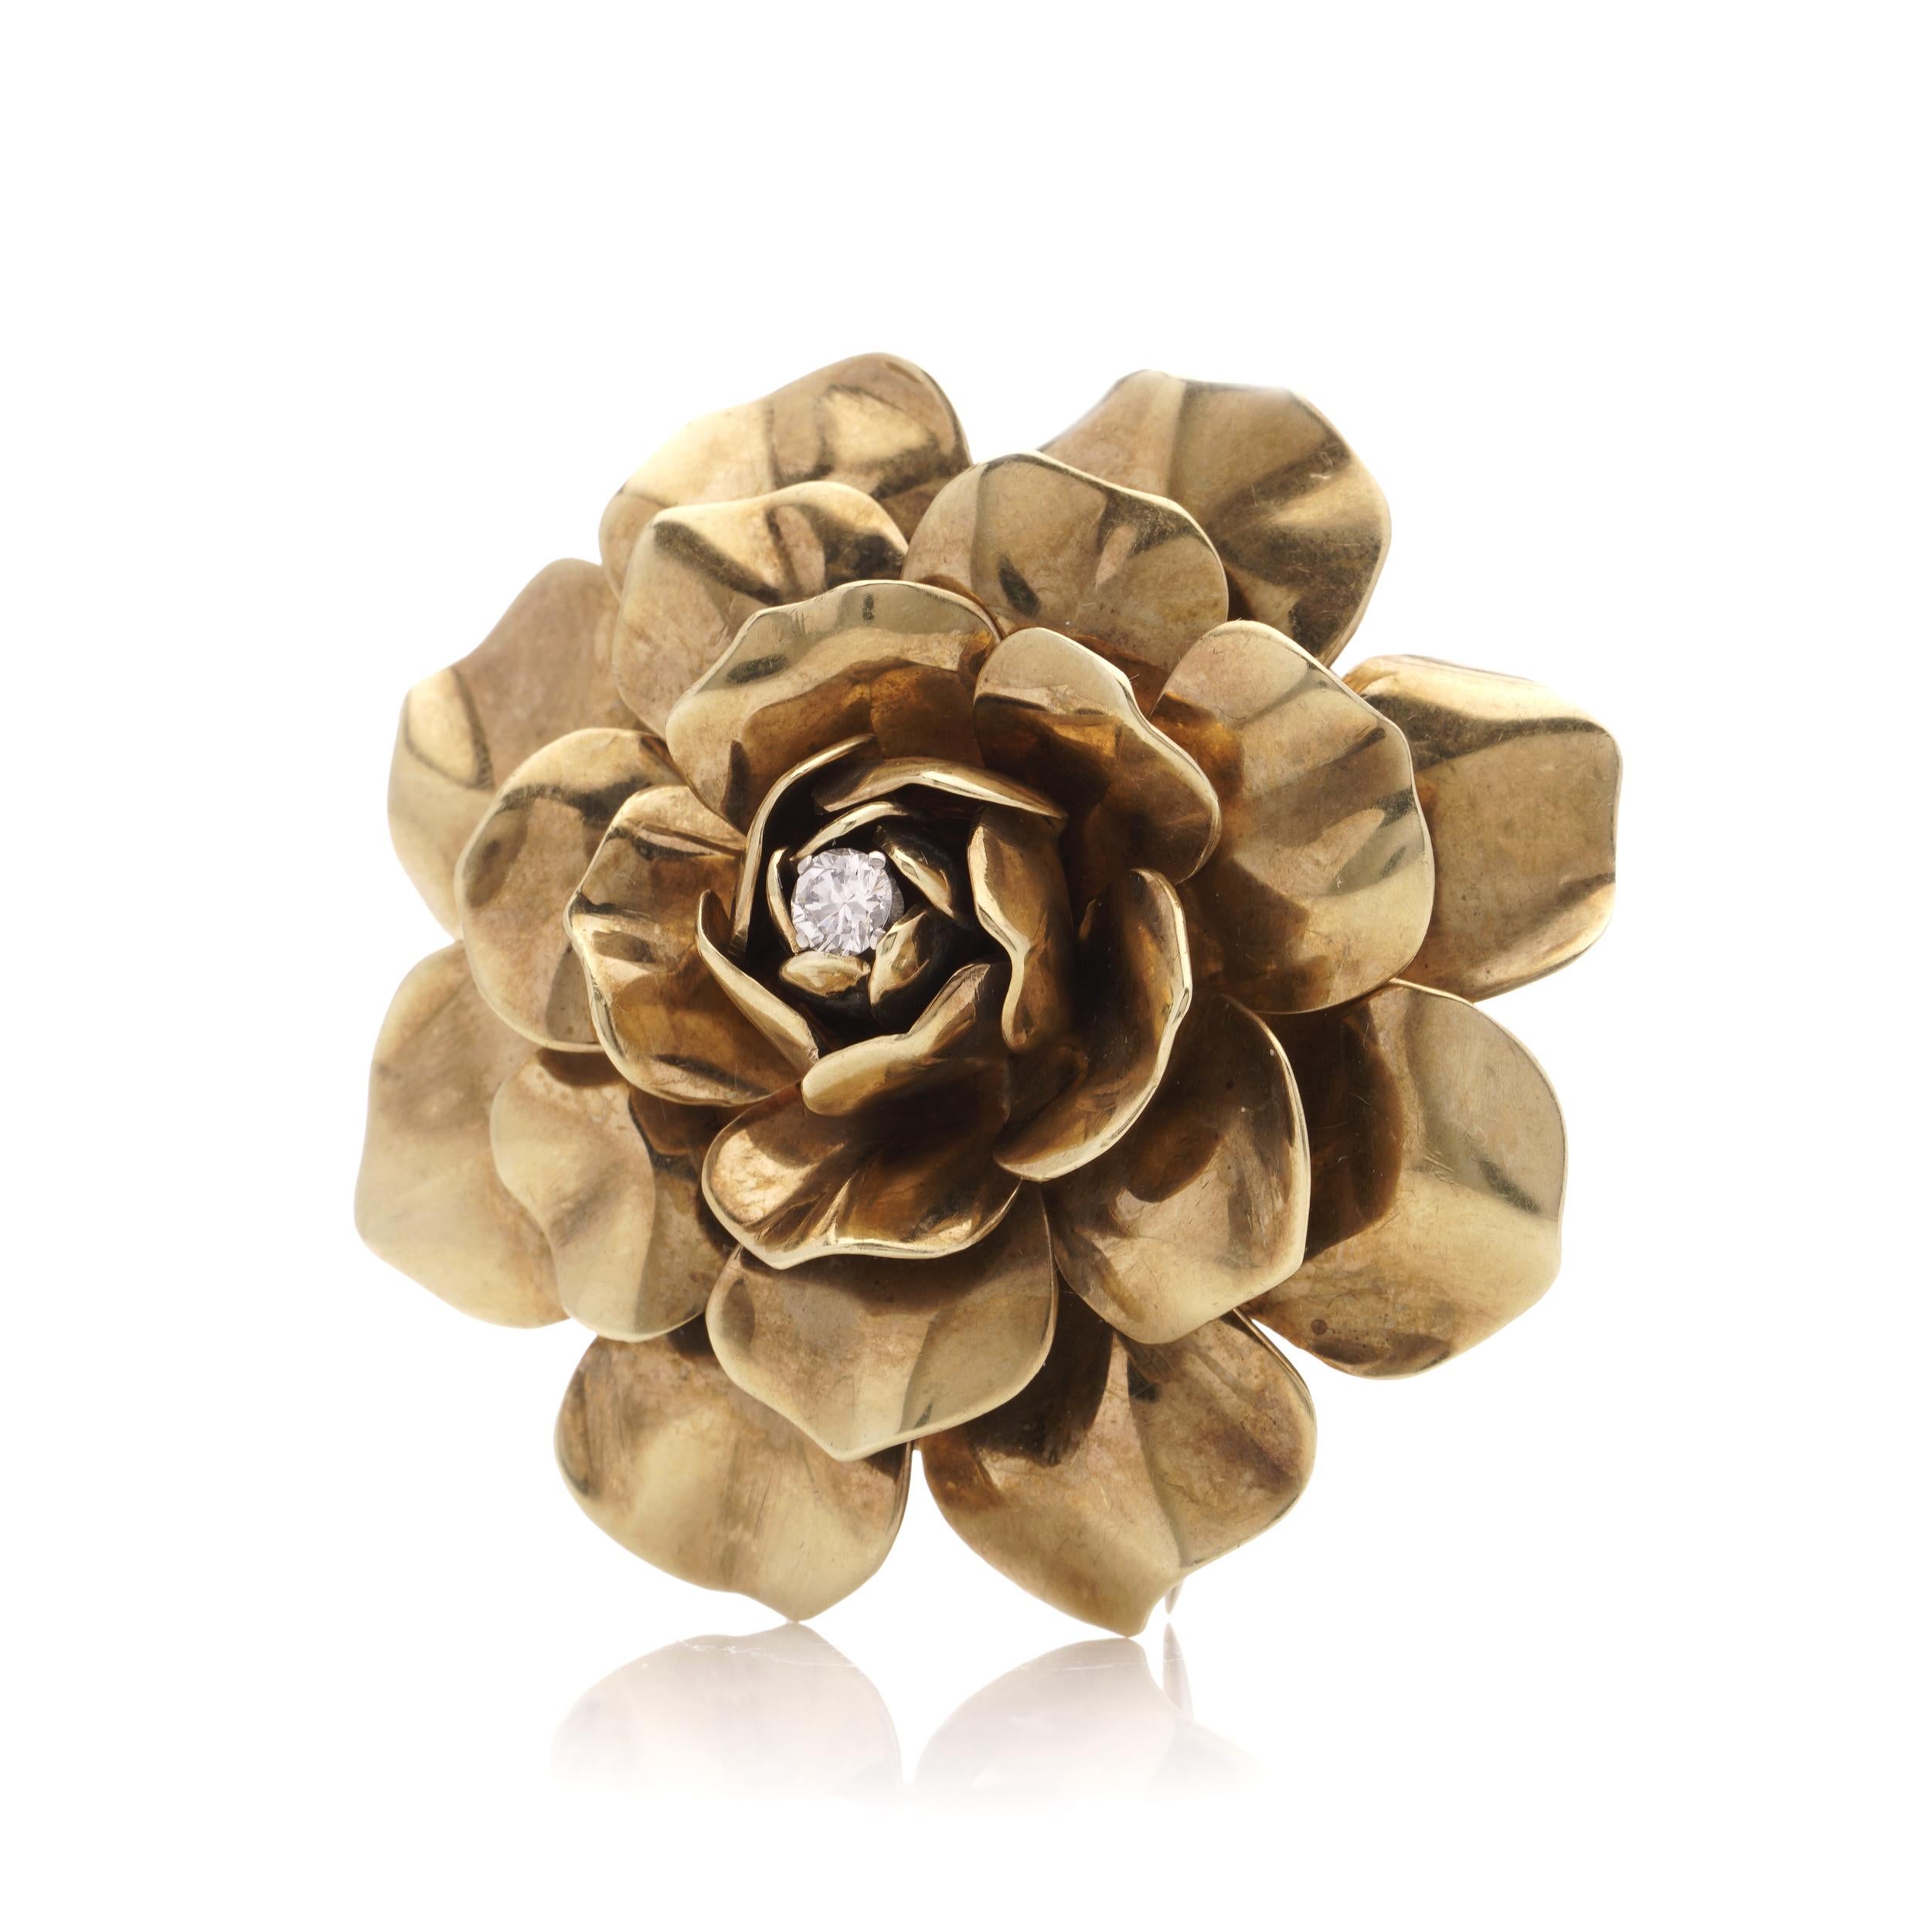 Boucheron vintage 18kt. yellow gold flower head brooch with old - European cut diamond.
Signed Boucheron, London, Date 5.51944, Initial letters L.S, pins have 19kt gold hallmarks.
Made in England, London 1944

Approx Dimensions -
Width x height: 5.5